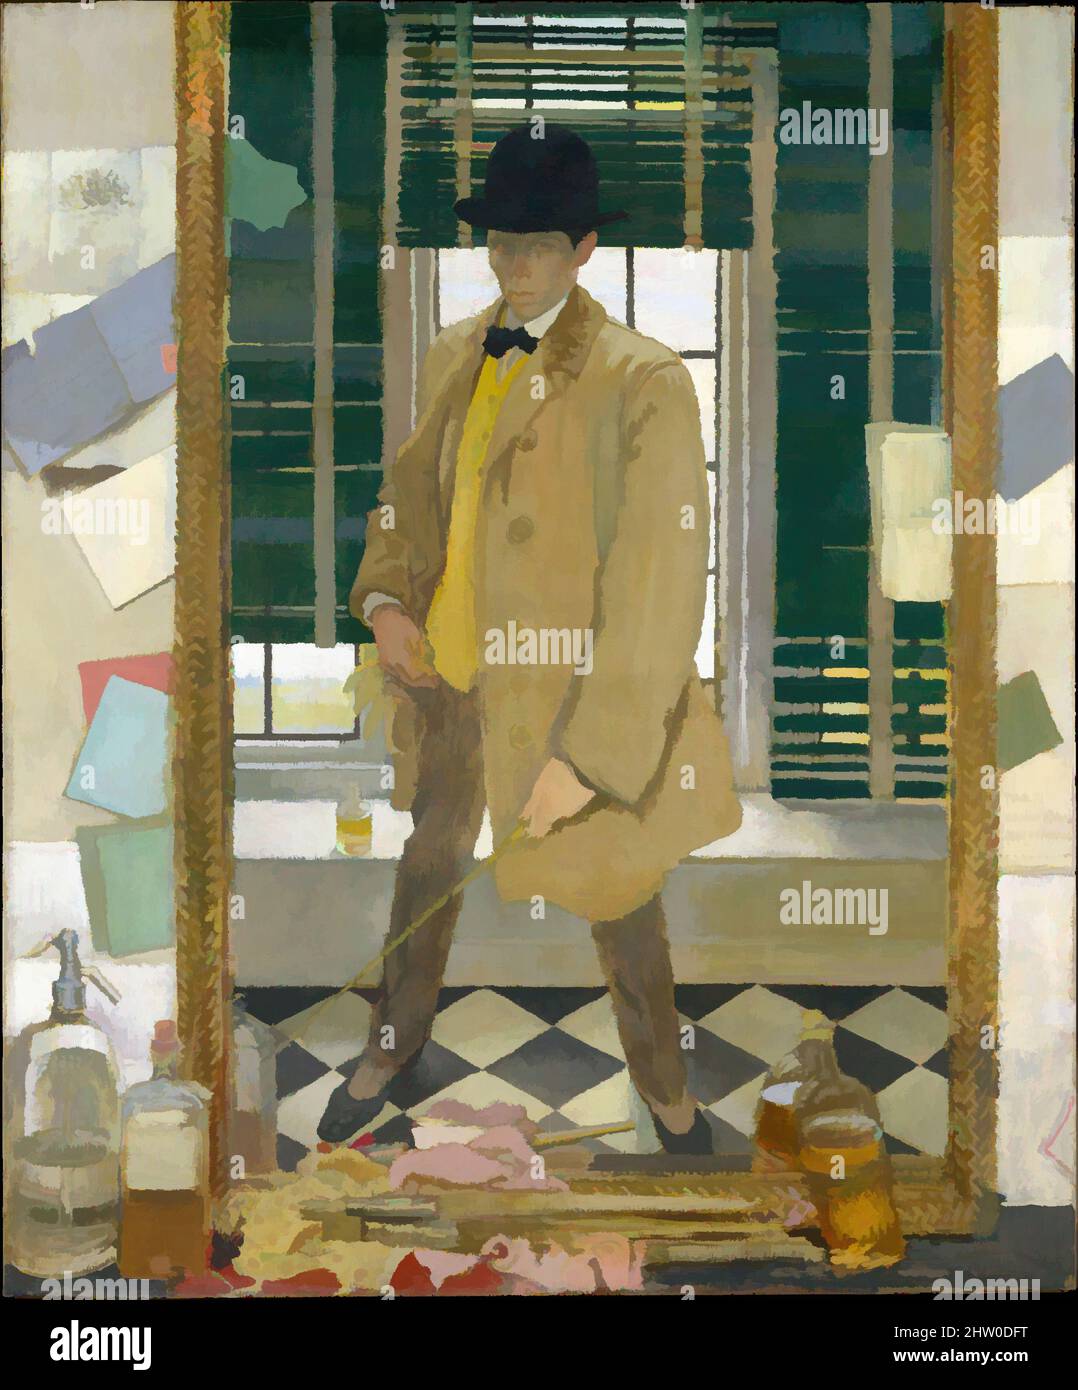 Art inspired by Self-Portrait, ca. 1910, Oil on canvas, 40 1/8 x 33 1/8 in. (101.9 x 84.1 cm), Paintings, William Orpen (British, 1878–1931), Born in Ireland, William Orpen studied in Dublin from 1892 to 1896 and went to London for further study at the Slade School of Fine Art in 1896, Classic works modernized by Artotop with a splash of modernity. Shapes, color and value, eye-catching visual impact on art. Emotions through freedom of artworks in a contemporary way. A timeless message pursuing a wildly creative new direction. Artists turning to the digital medium and creating the Artotop NFT Stock Photo